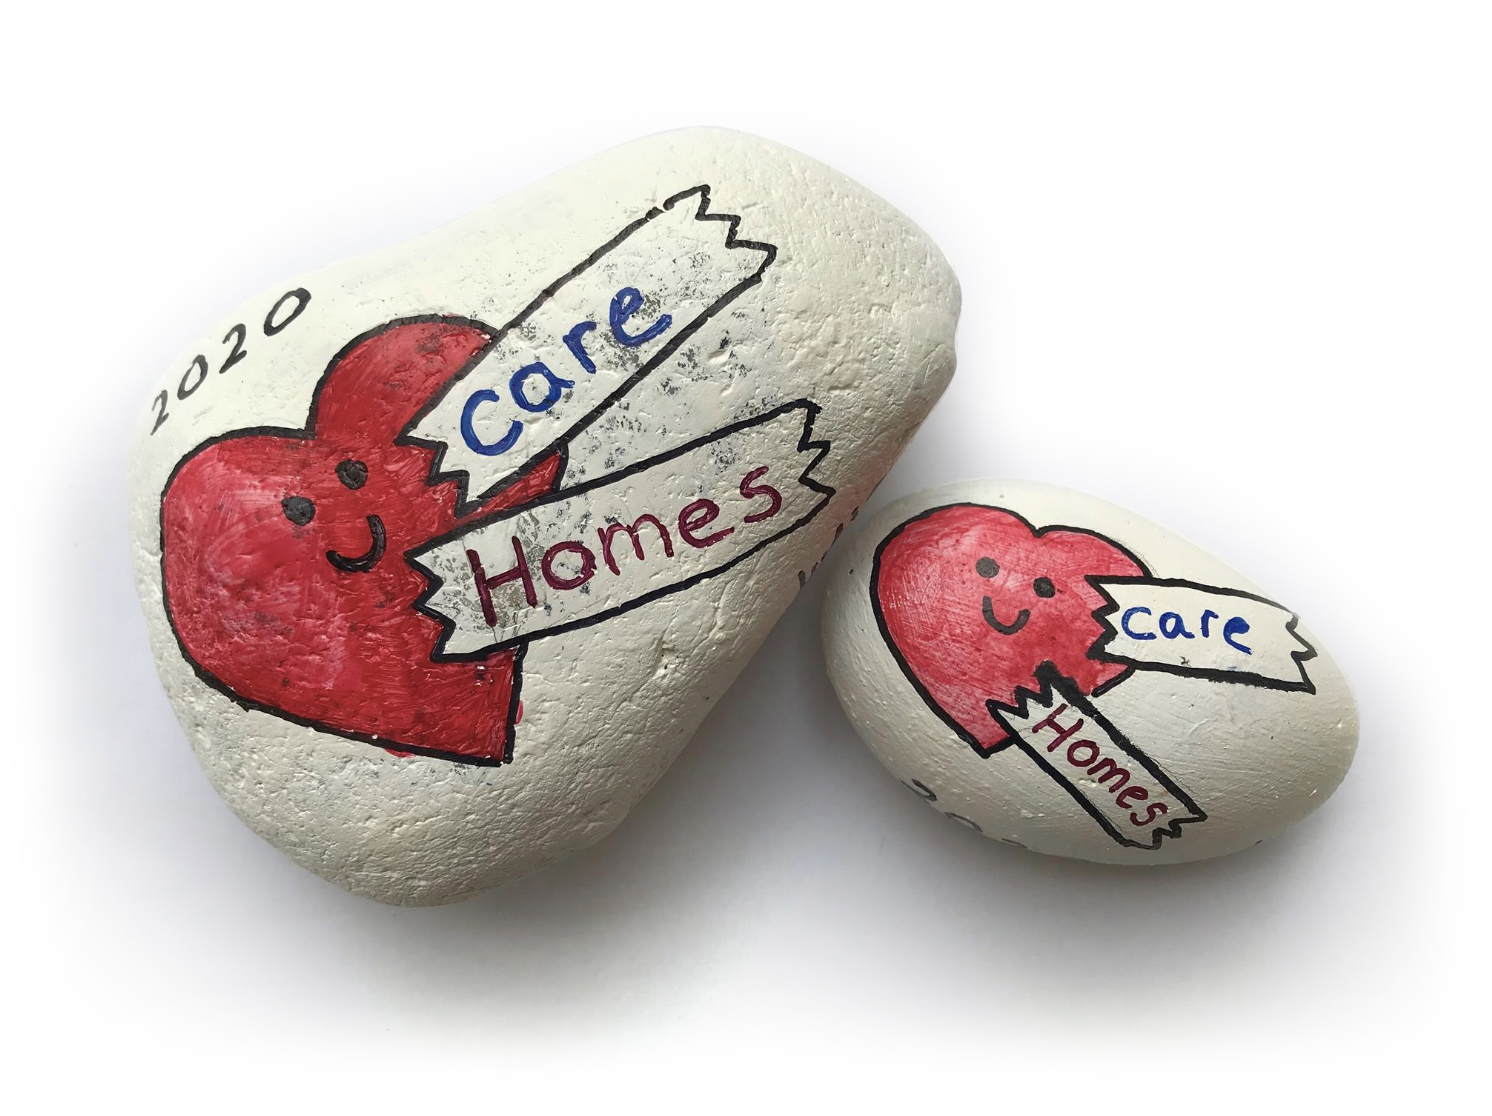 Two stones are side by side and painted with a red heart that has a black smiley face. The year 2020 is painted on in black above the heart on the left stone, and both of them have 'care homes' painted on in ribbons slightly overlapping the hearts.